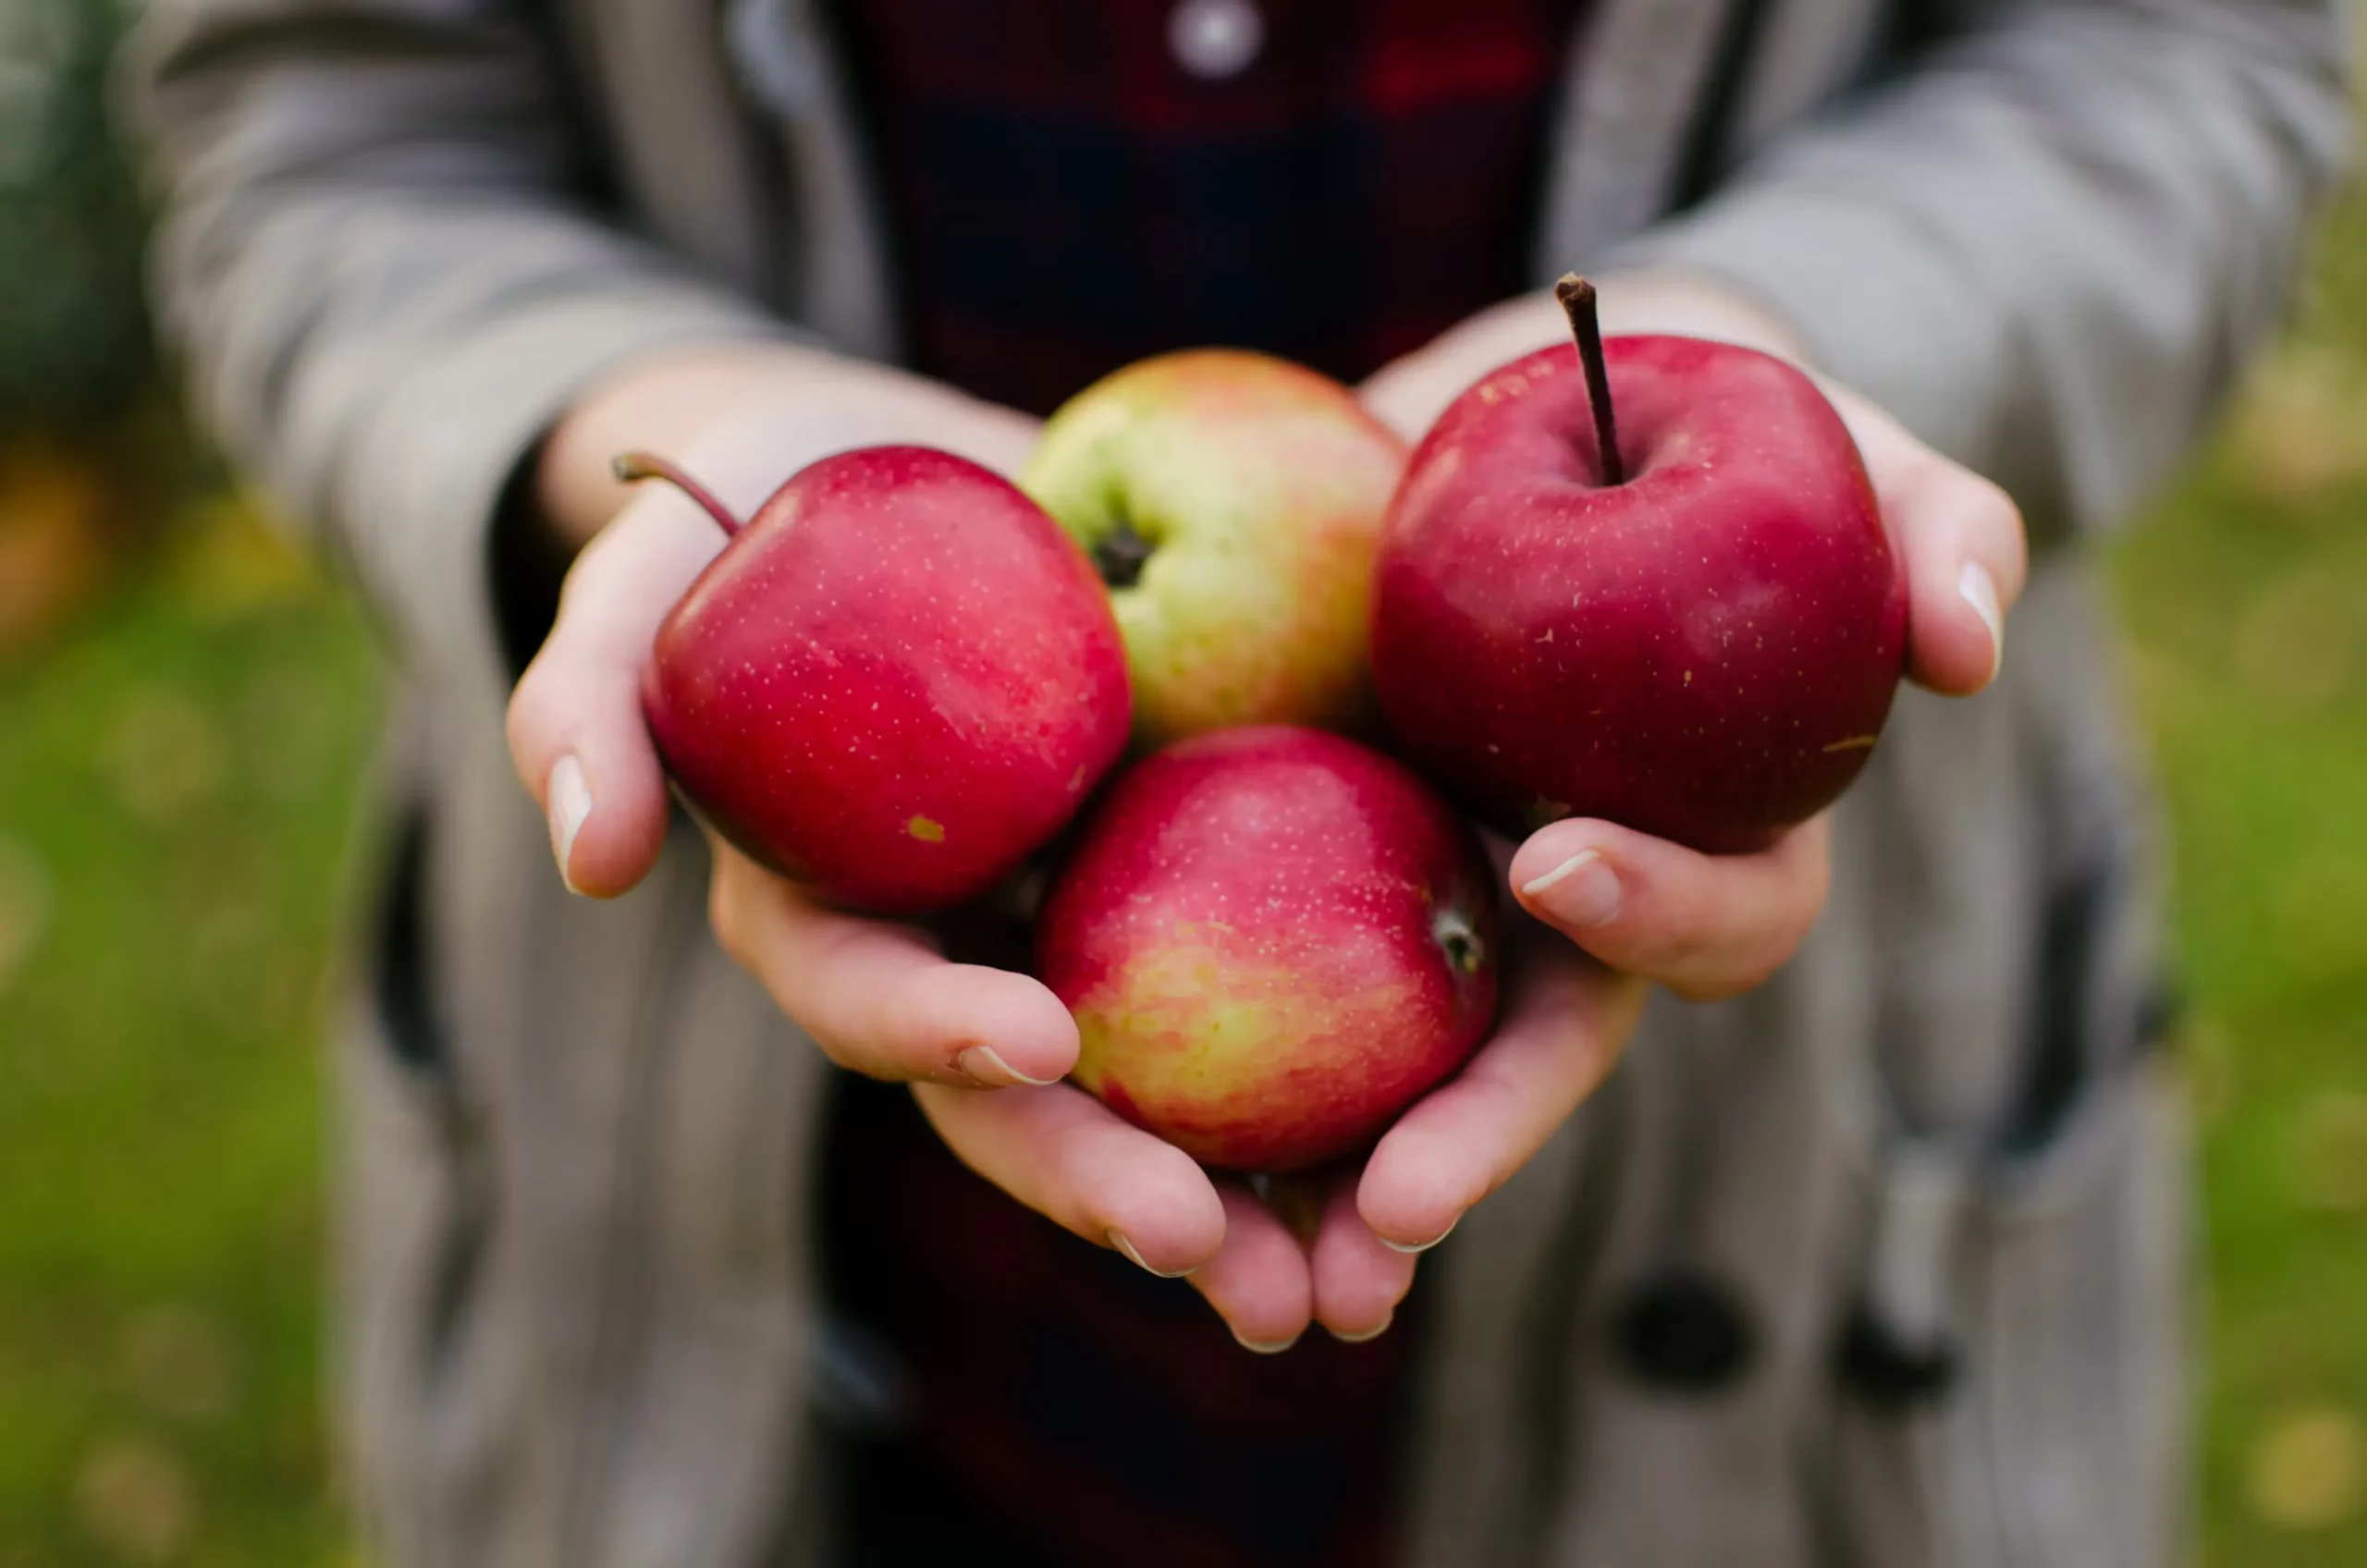 Highly available all year long, apples have countless benefits, including anti-inflammatory properties